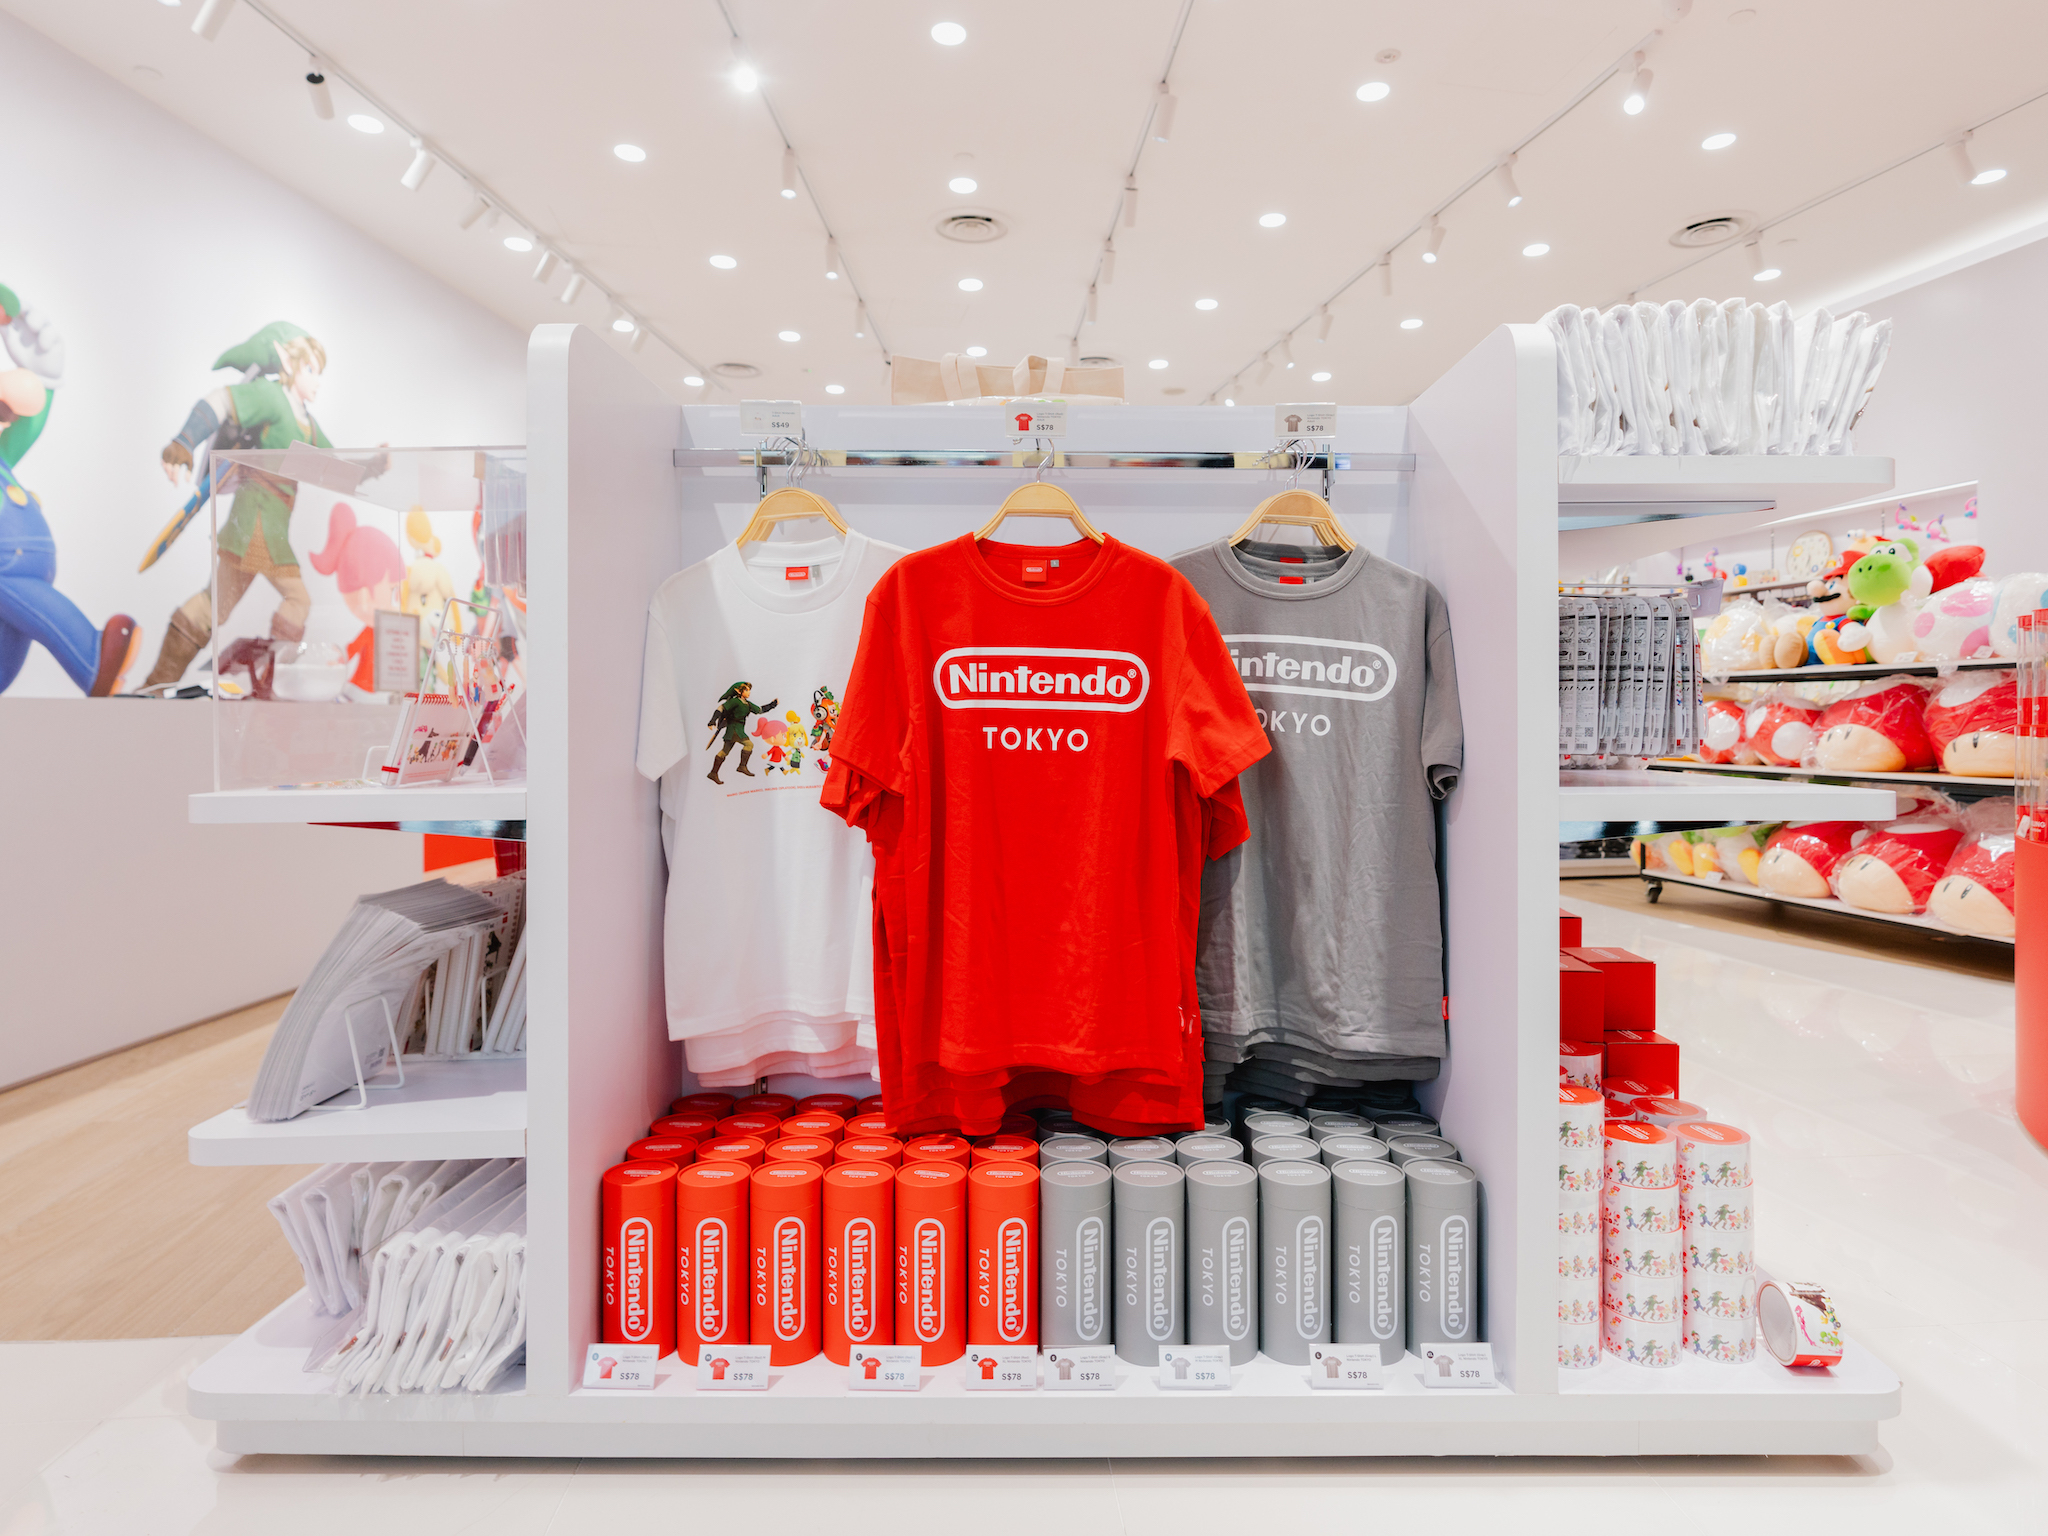 Nintendo Pop-Up Store Singapore To Open At Jewel Changi Airport In November